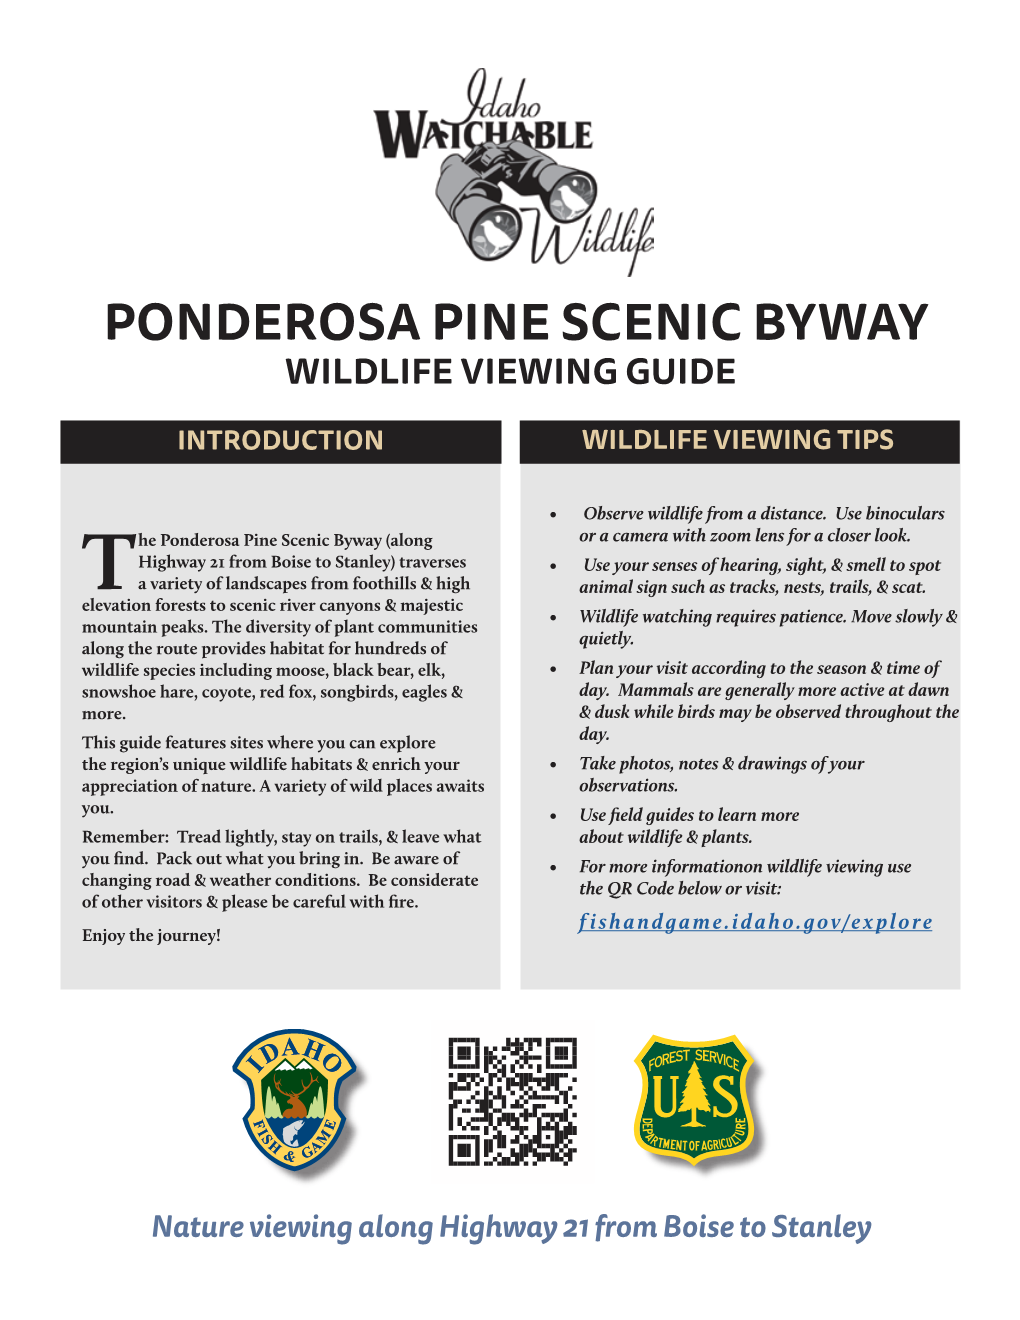 Ponderosa Pine Scenic Byway Wildlife Viewing Guide